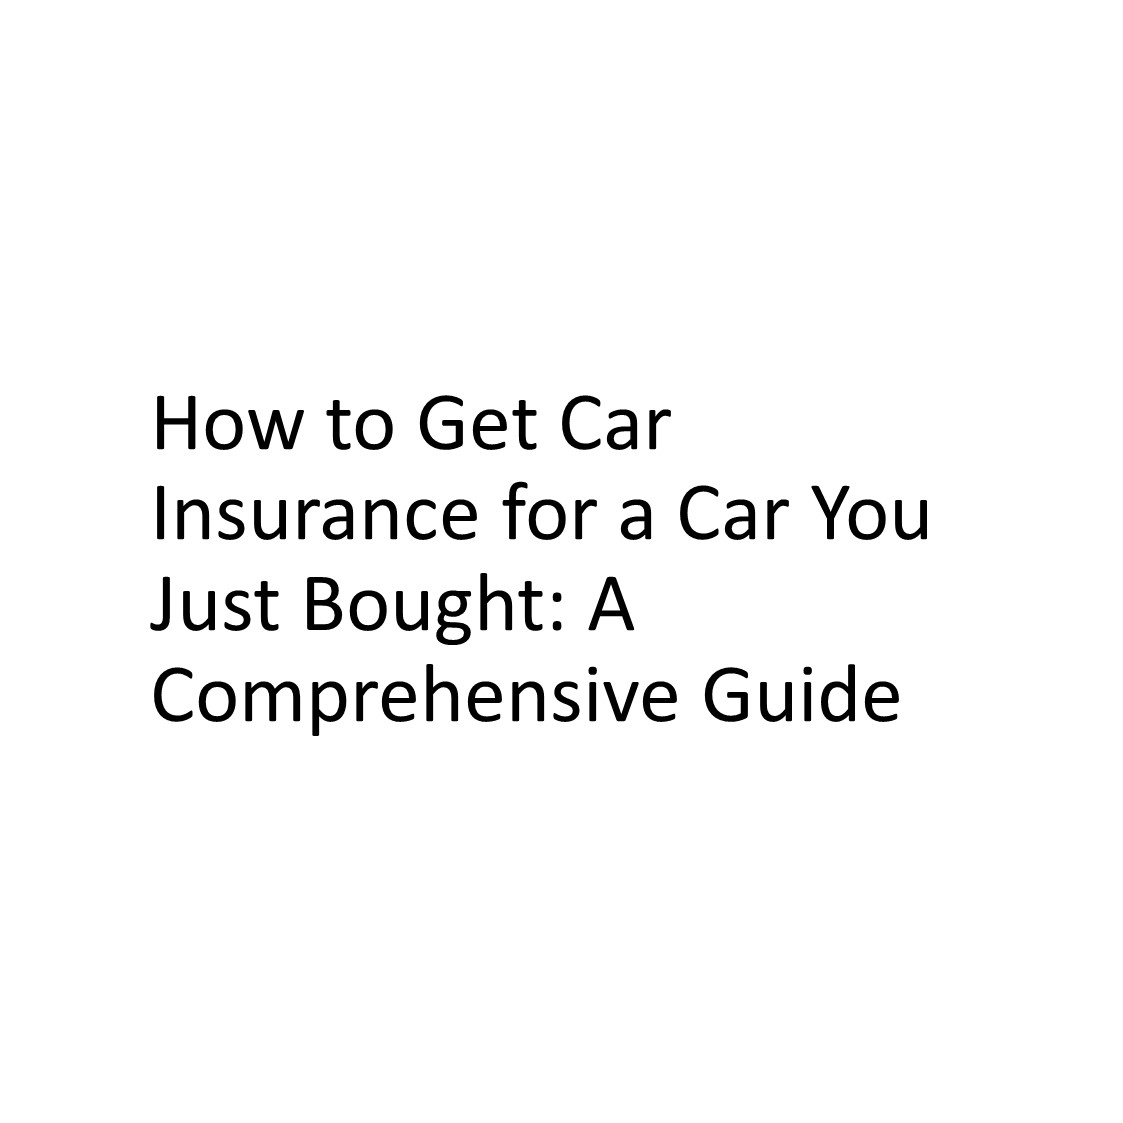 How to Get Car Insurance for a Car You Just Bought: A Comprehensive Guide